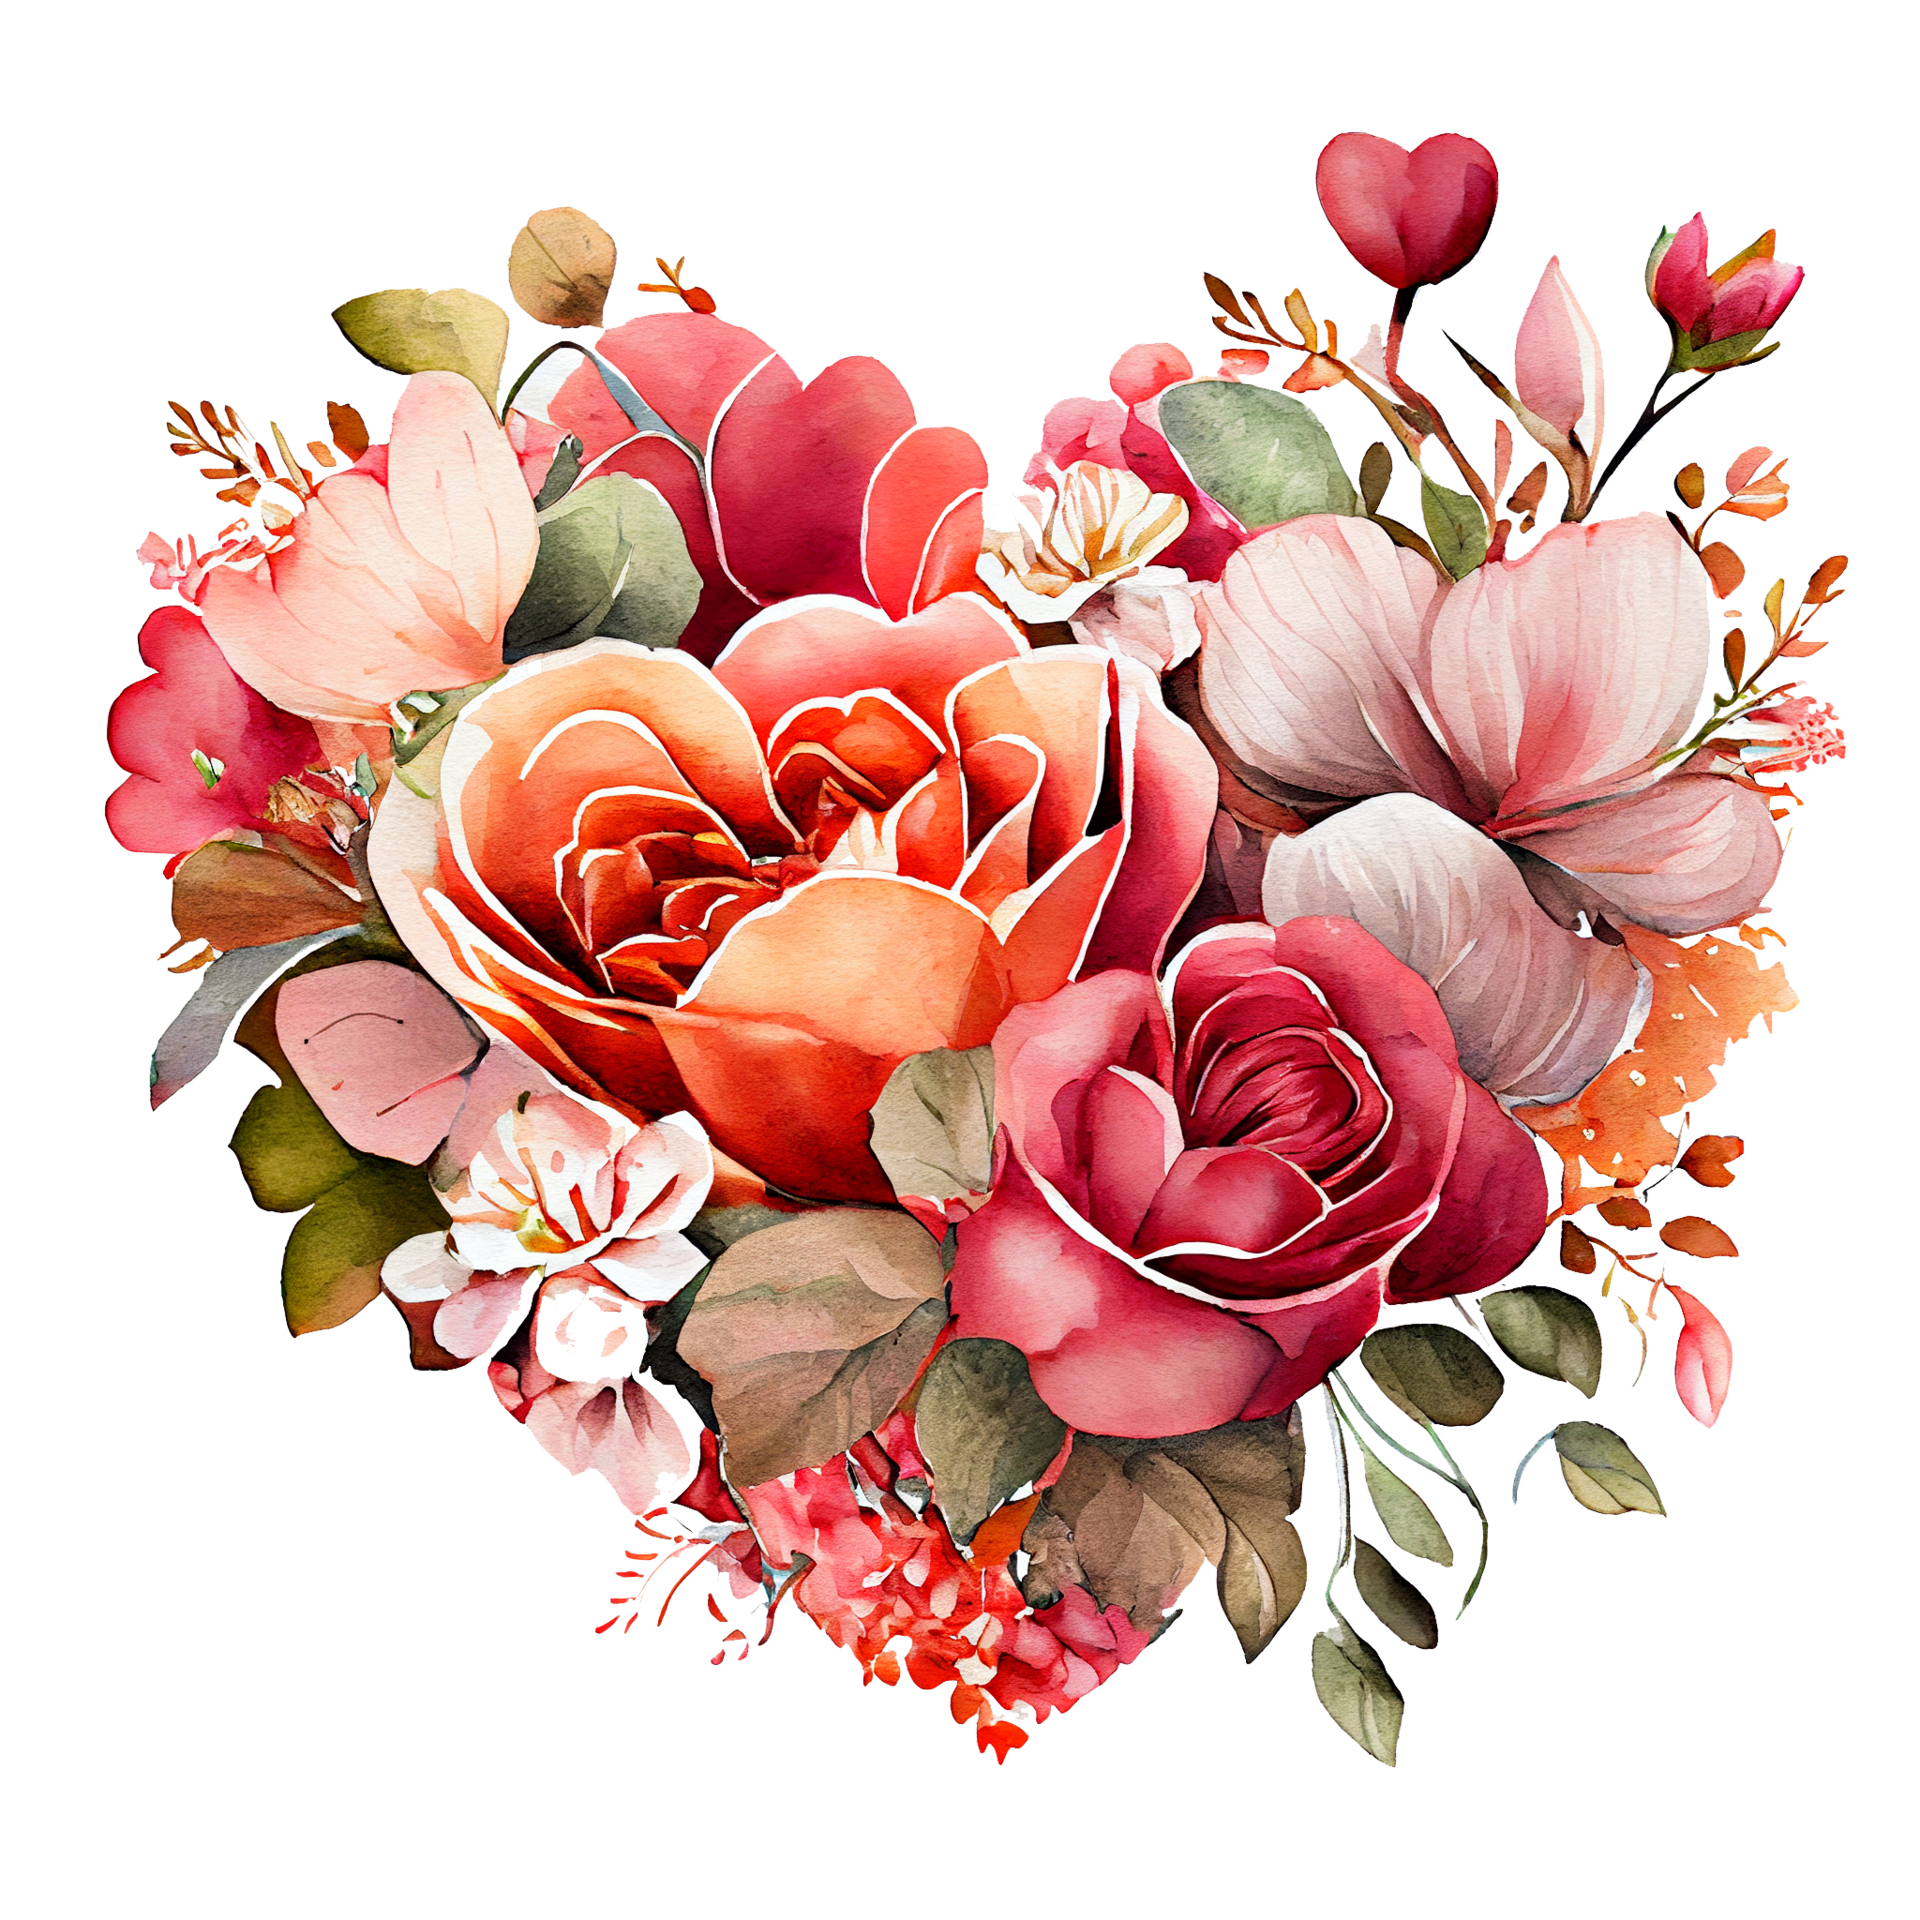 https://static.vecteezy.com/system/resources/previews/022/245/632/original/heart-shaped-rose-bouquet-romantic-heart-vignette-made-of-vintage-flowers-and-leaves-of-roses-in-gentle-retro-style-watercolor-painting-transparent-background-generative-ai-png.png